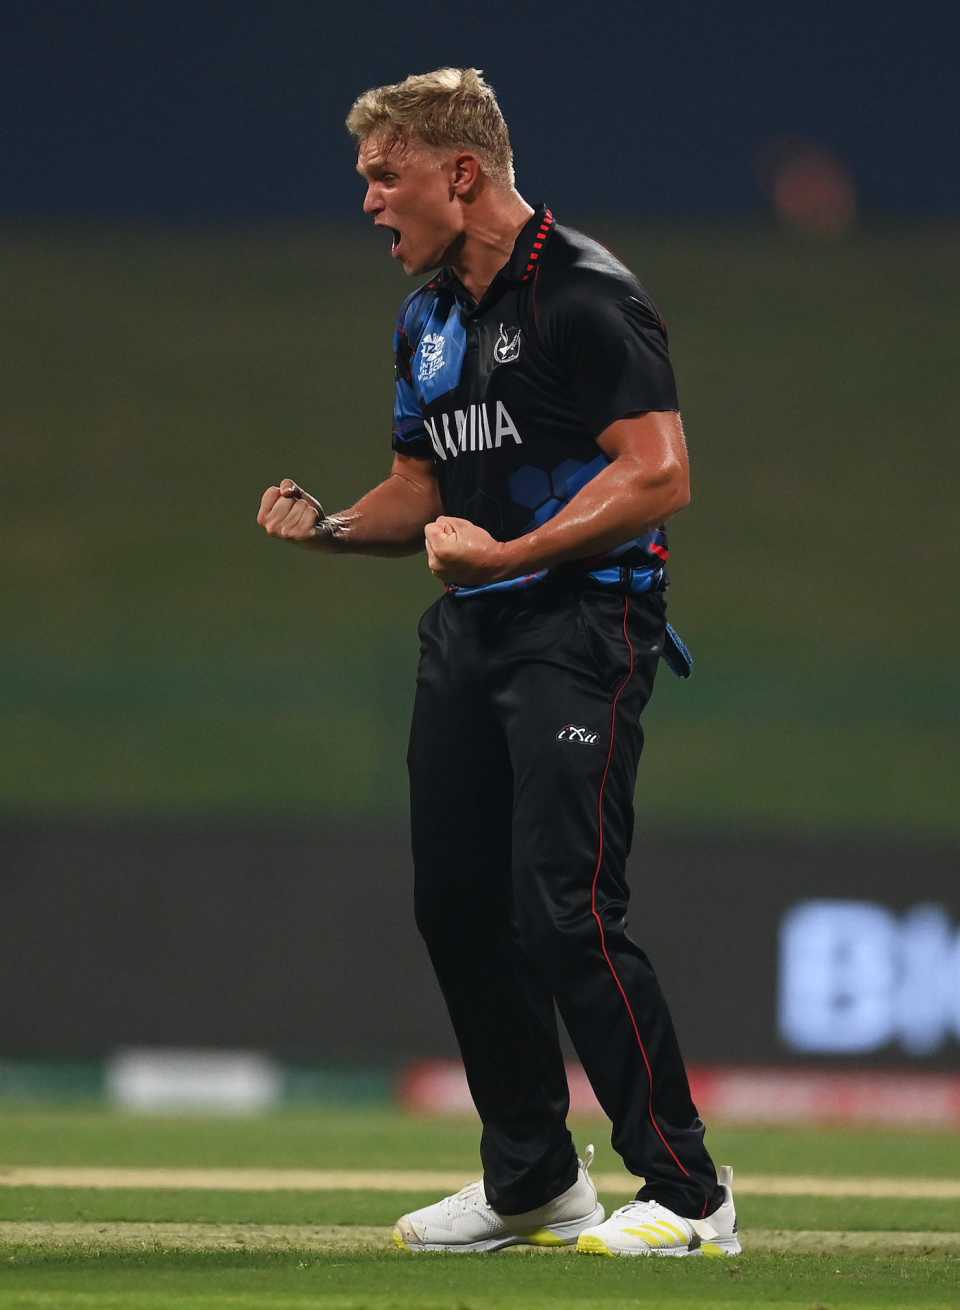 Ruben Trumpelmann is pumped after taking a wicket, Sri Lanka vs Namibia, T20 World Cup 2021, 1st round, Group A, Abu Dhabi, October 18, 2021